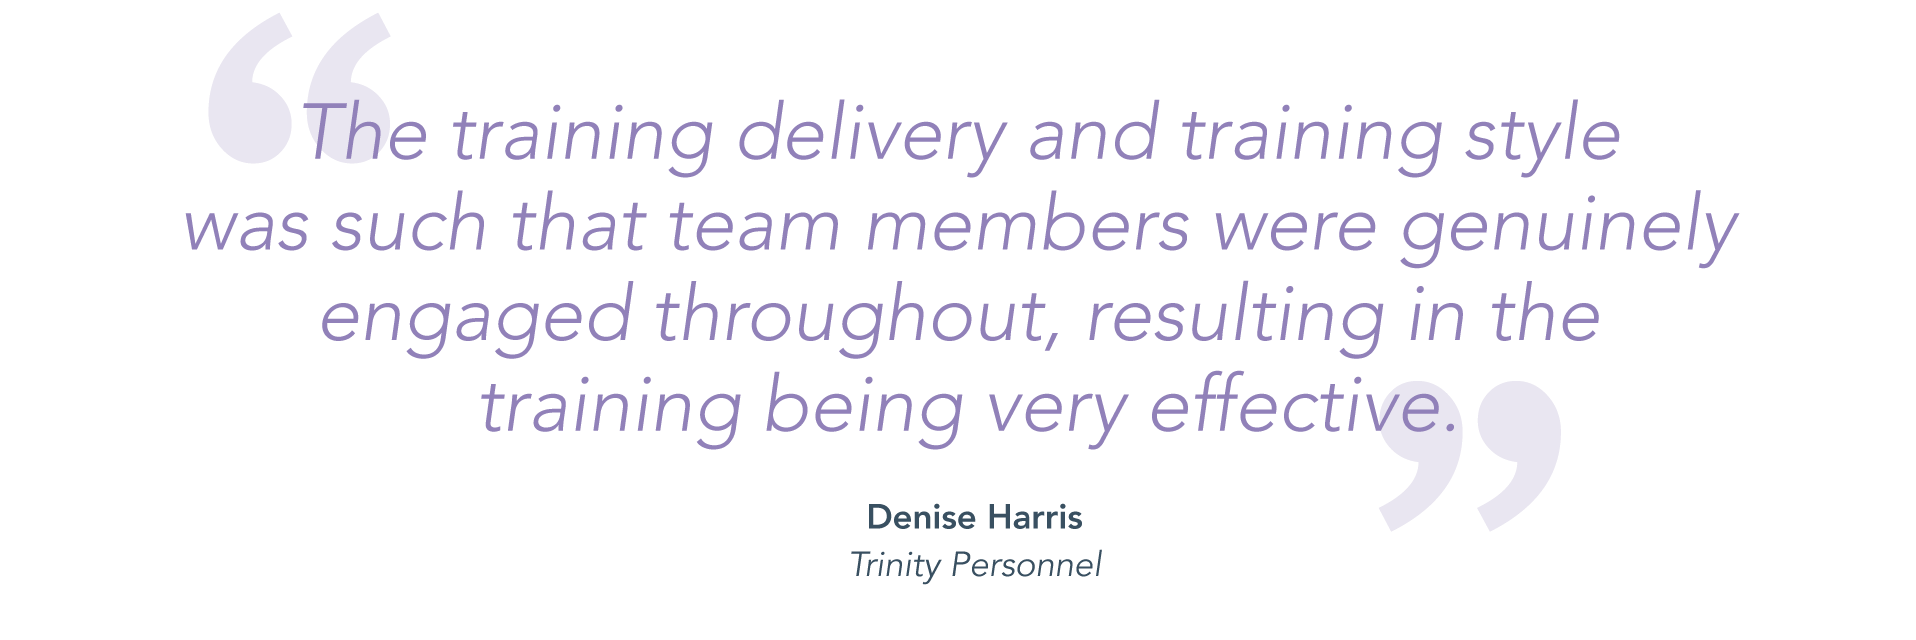 "The training delivery and training style was such that team members were genuinely engaged throughout, resulting in the training being very effective." - Denise Harris, Trinity Personnel.